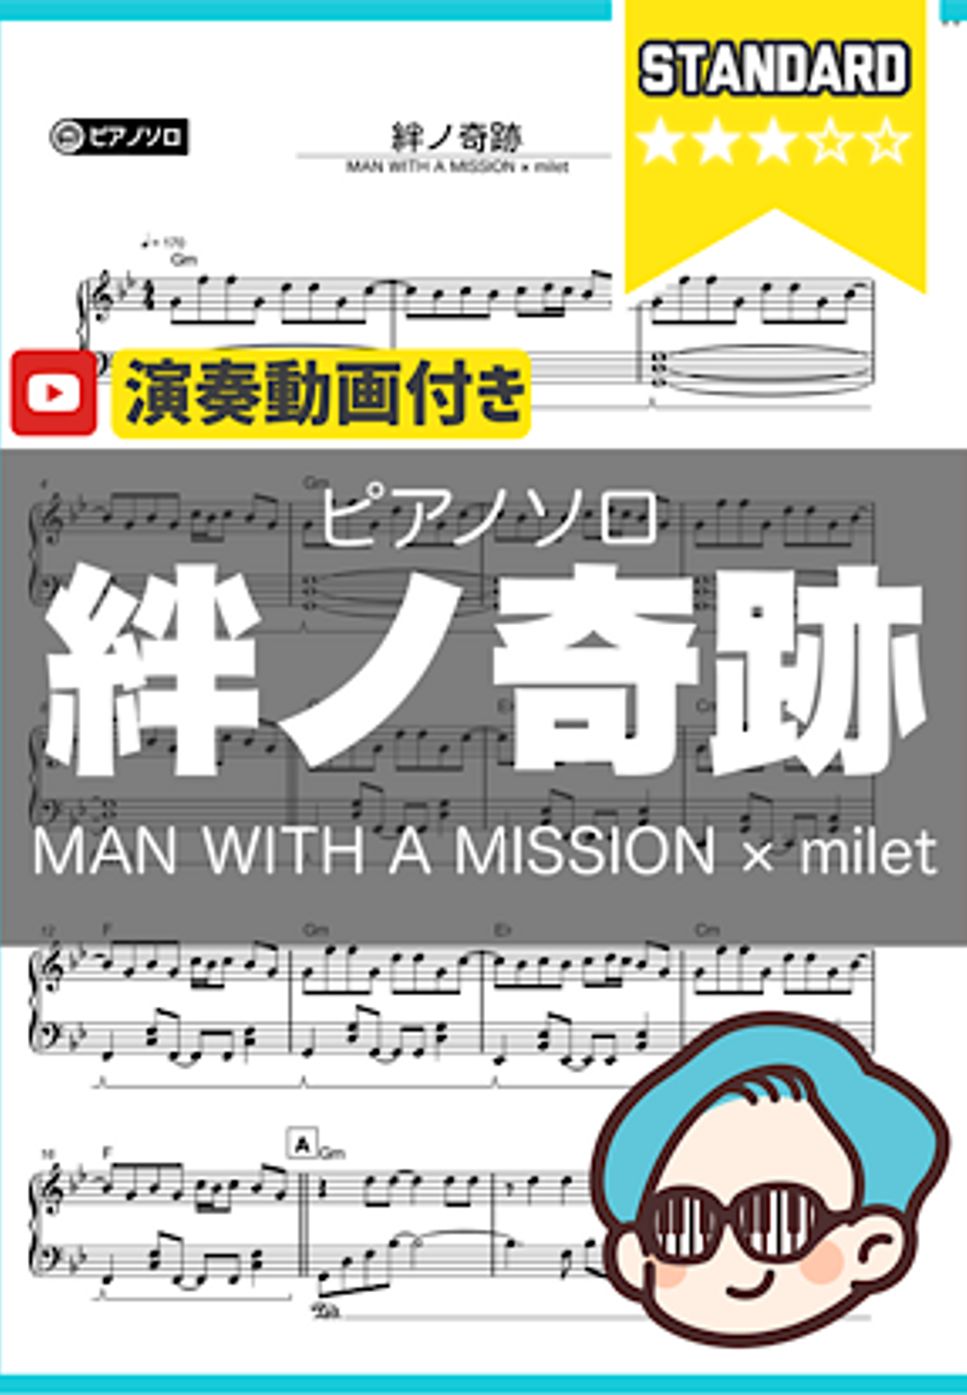 MAN WITH A MISSION×milet - 絆ノ奇跡 by シータピアノ